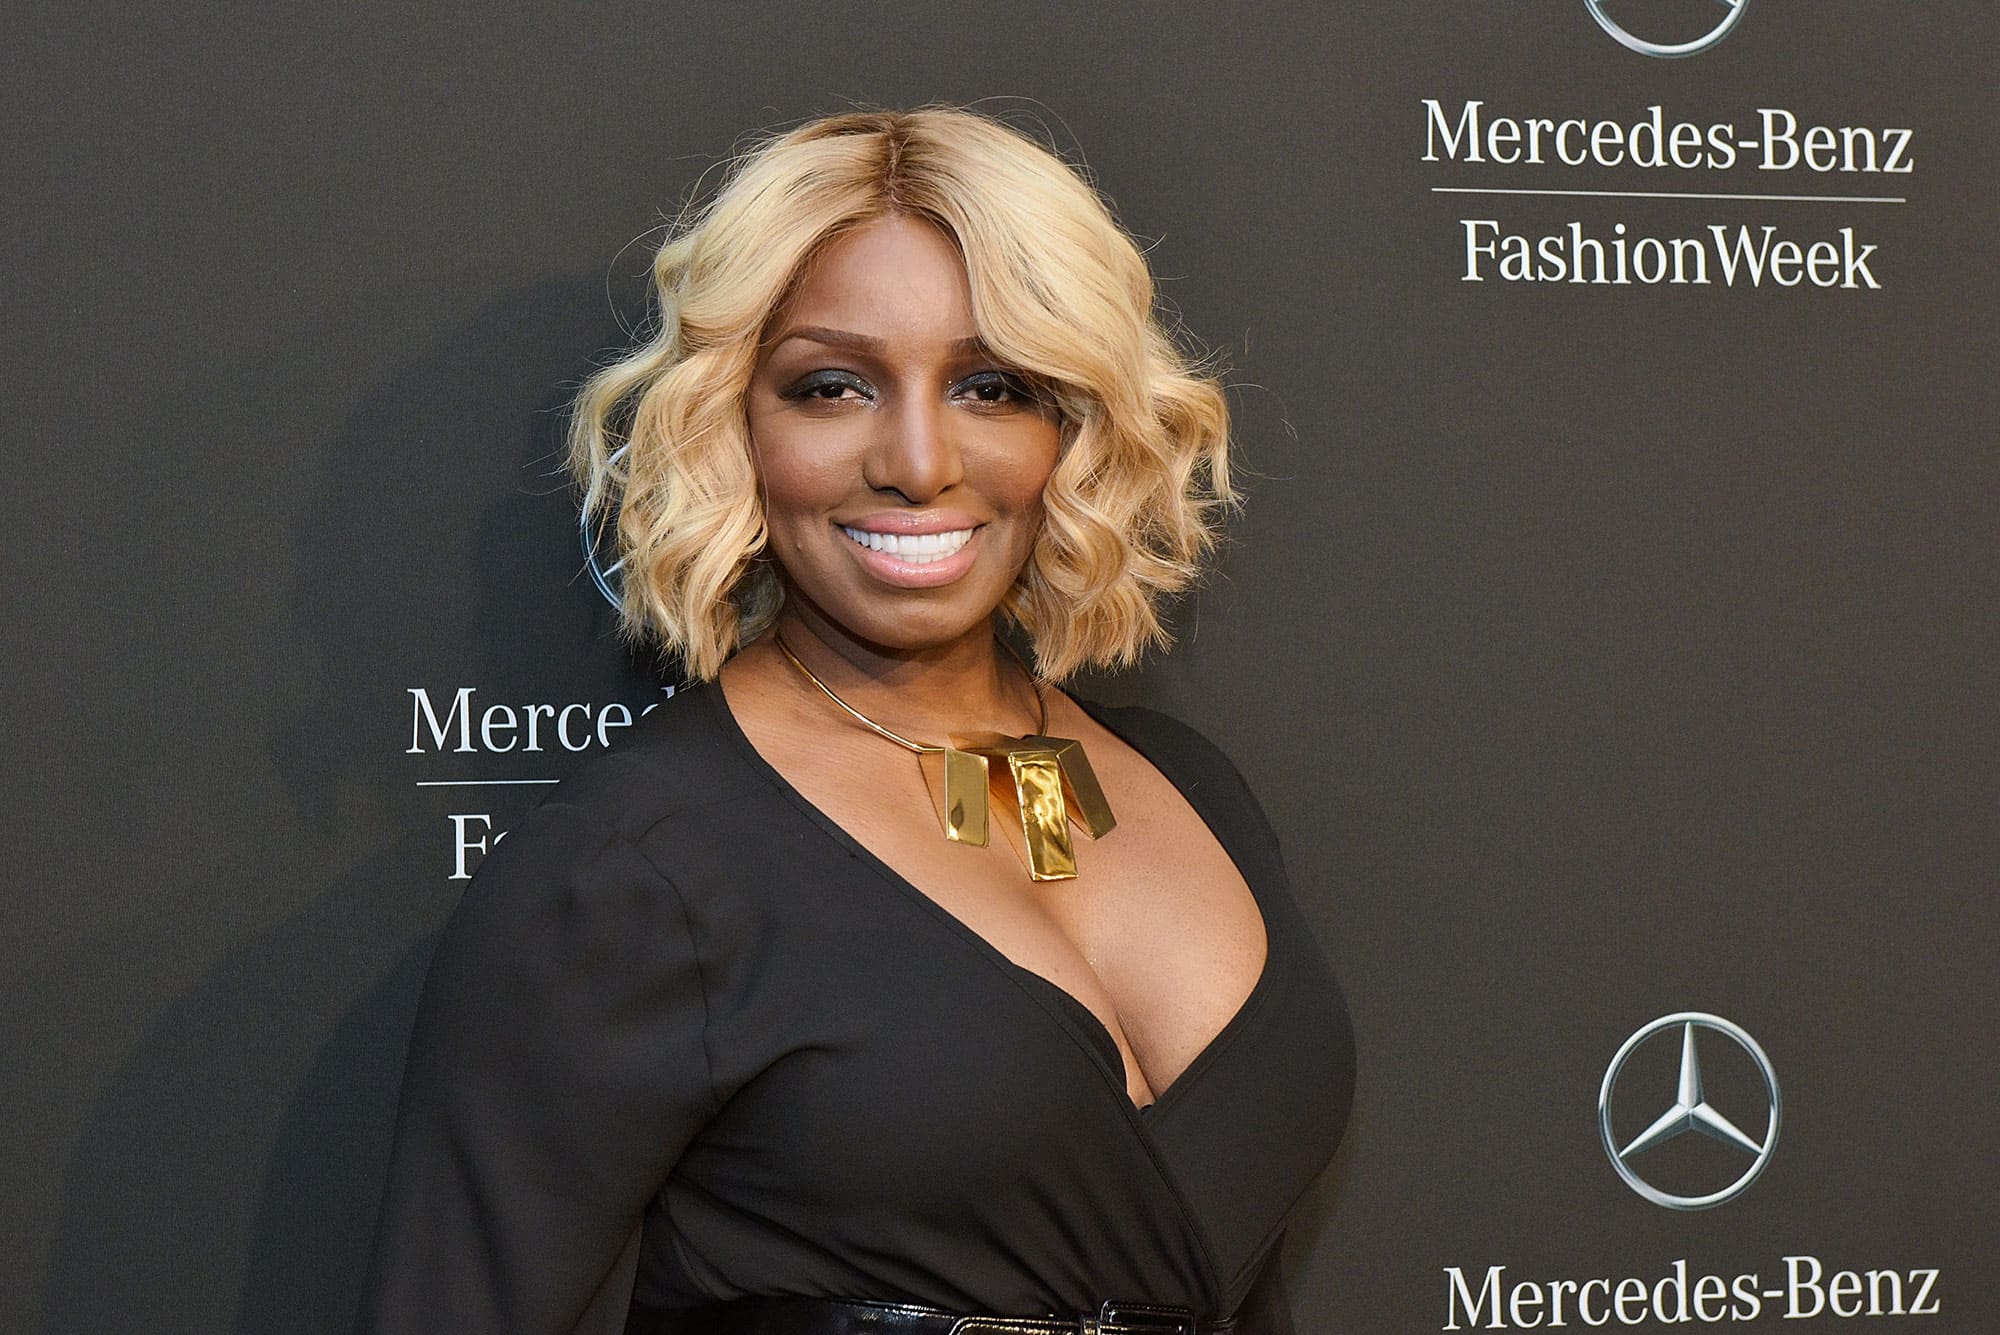 ”nene-leakes-is-overwhelmed-by-a-lot-of-supporters-who-stopped-by-her-swagg-boutique-watch-the-videos-ig-followers-body-shame-her”